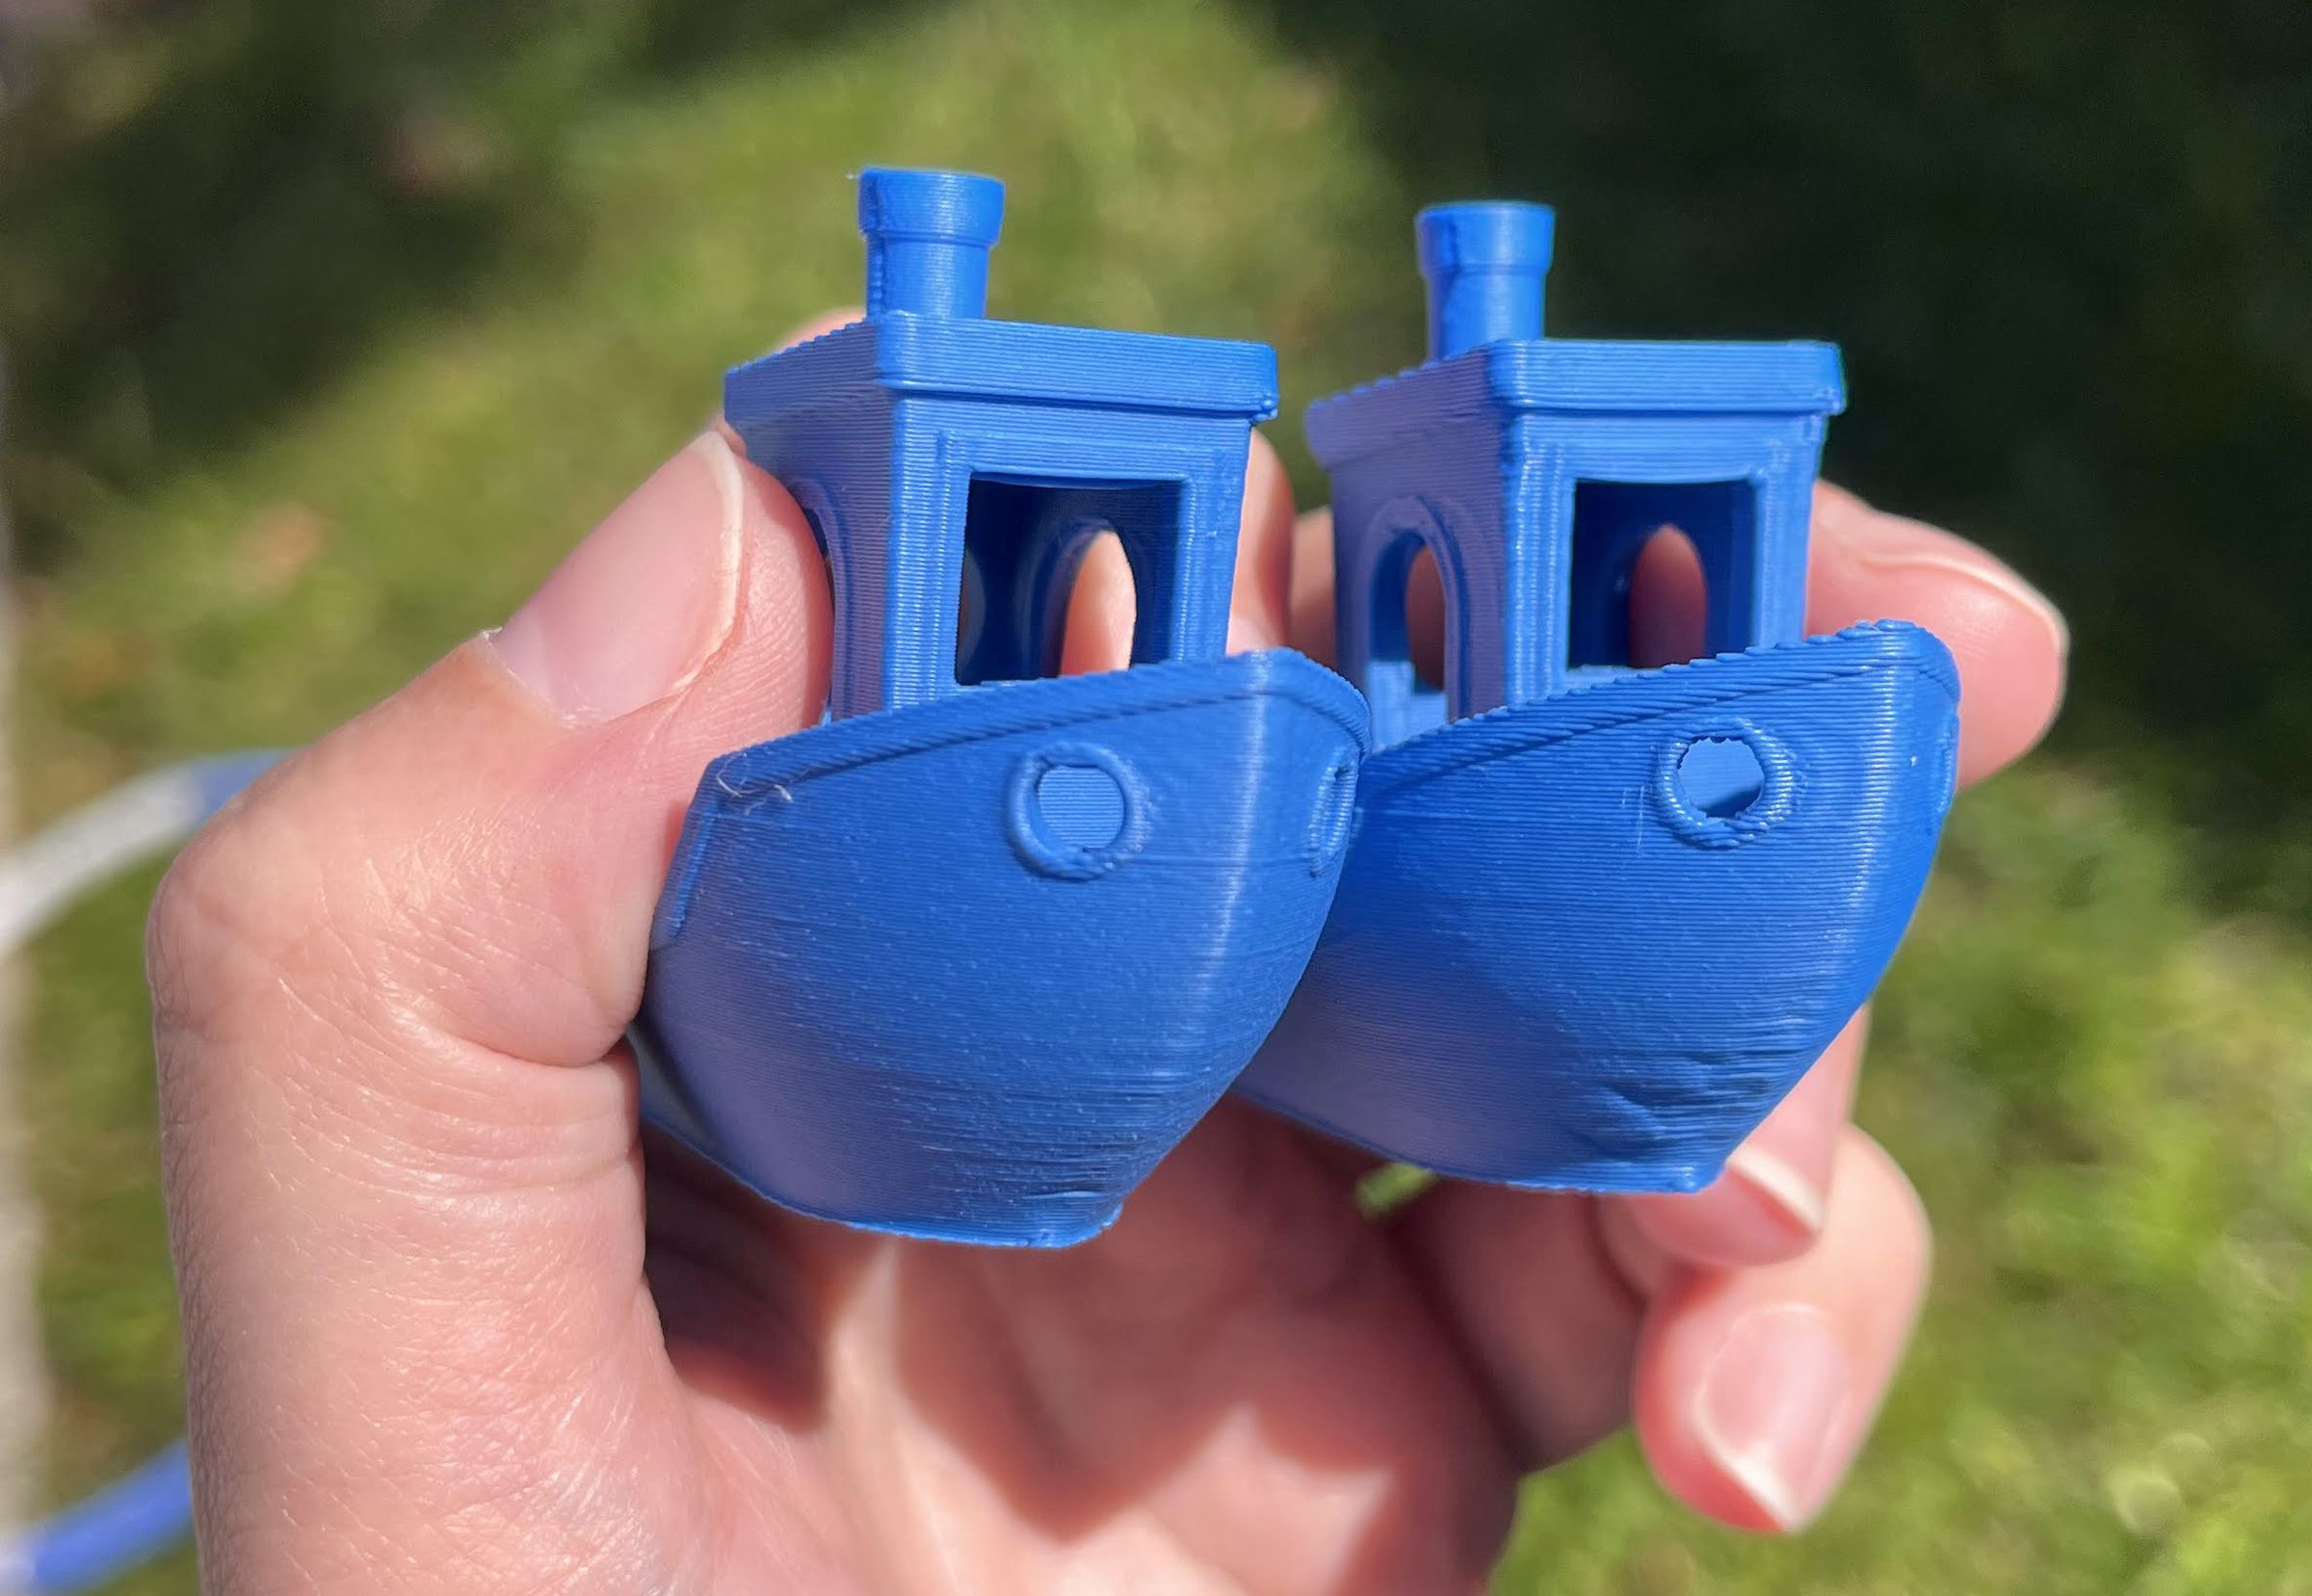 Two blue 3D printed boats with obvious layer lines as you go up and down.